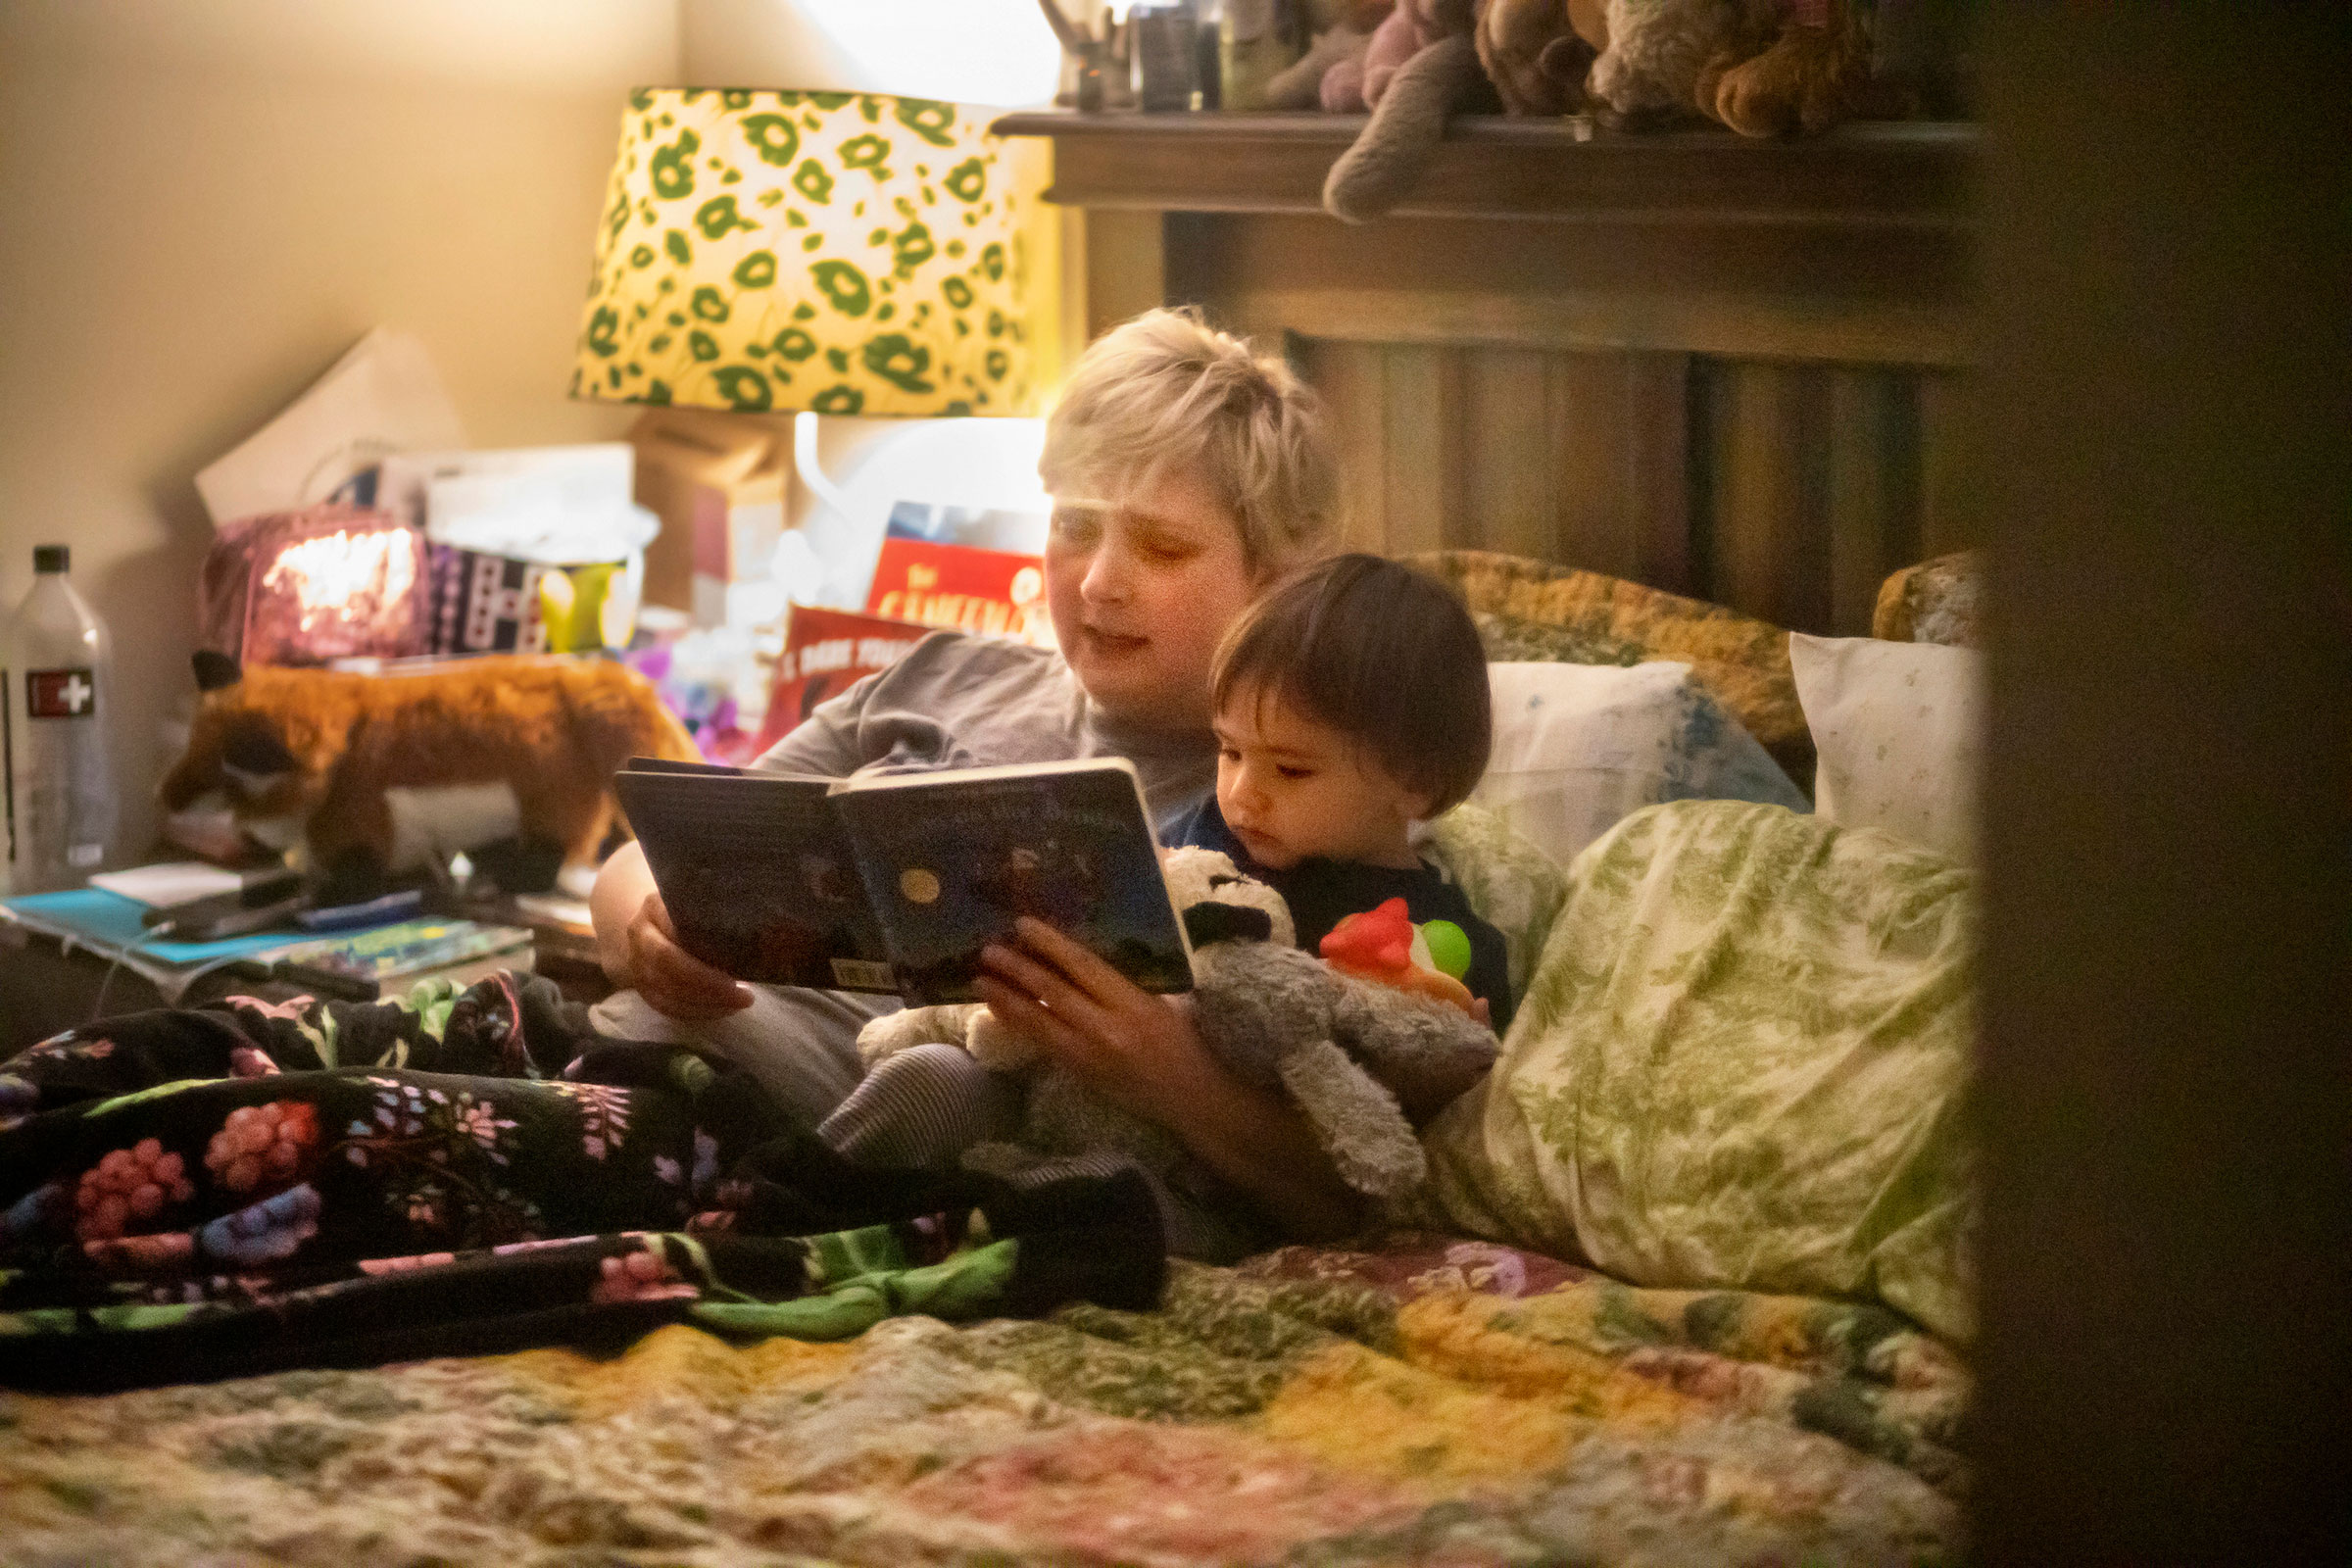 Laurie Halbrook is seen through a window reading a bedtime book to her eighteen month old son Jack, at their home in New Orleans. (Kathleen Flynn for TIME)